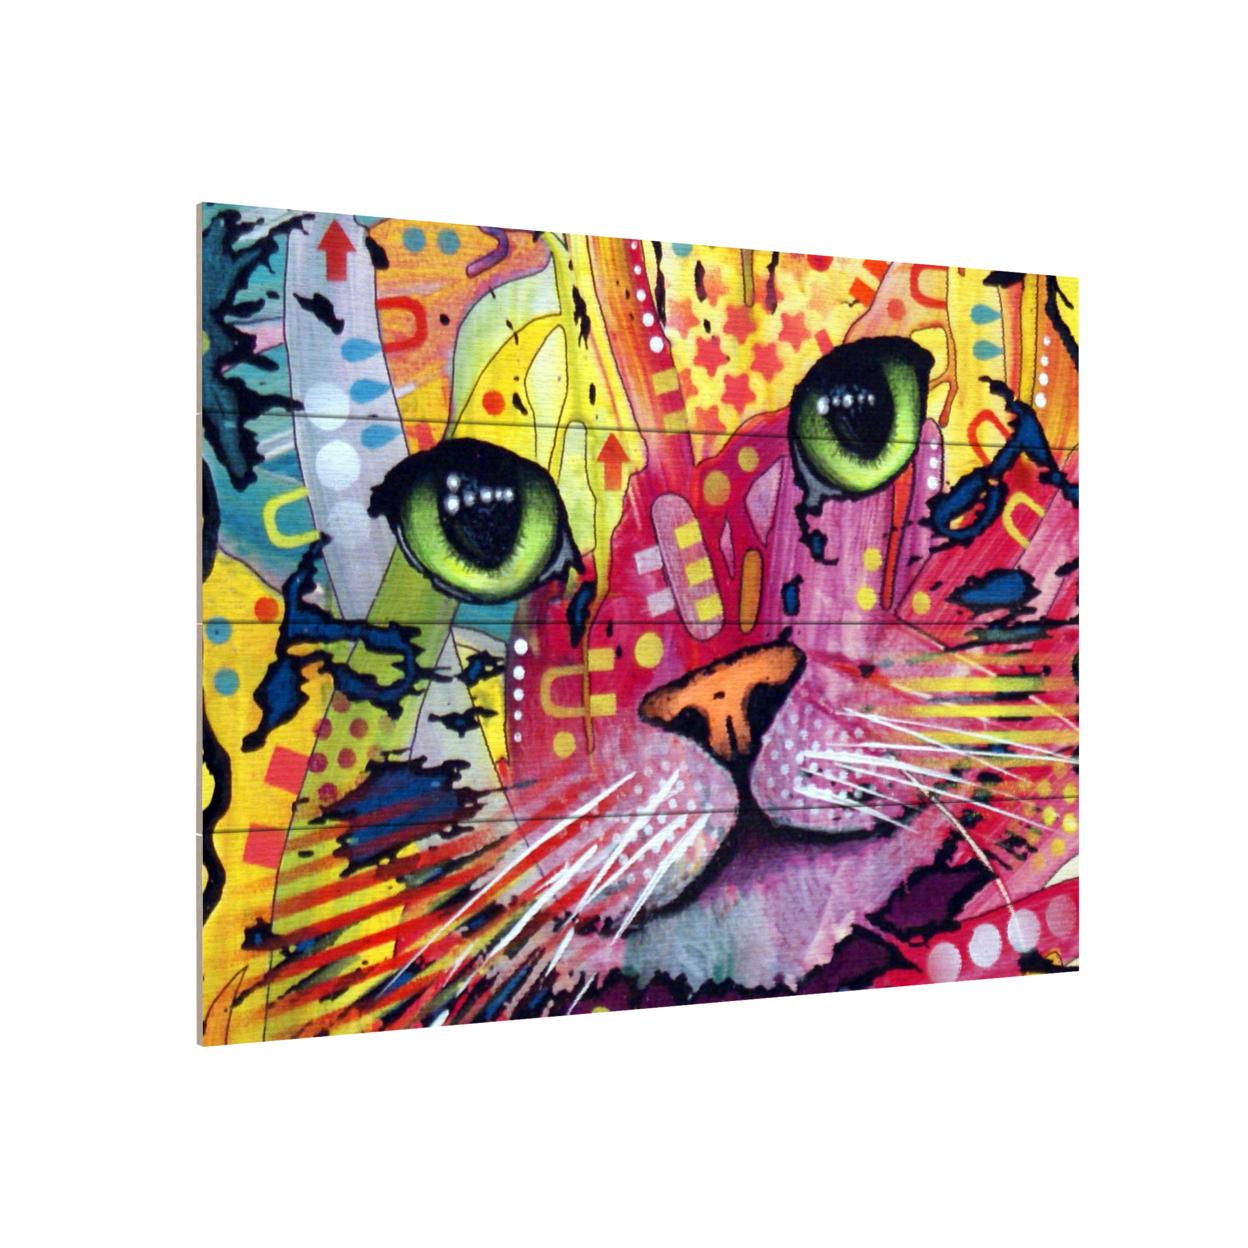 Wall Art 12 X 16 Inches Titled Tilt Cat Ready To Hang Printed On Wooden Planks